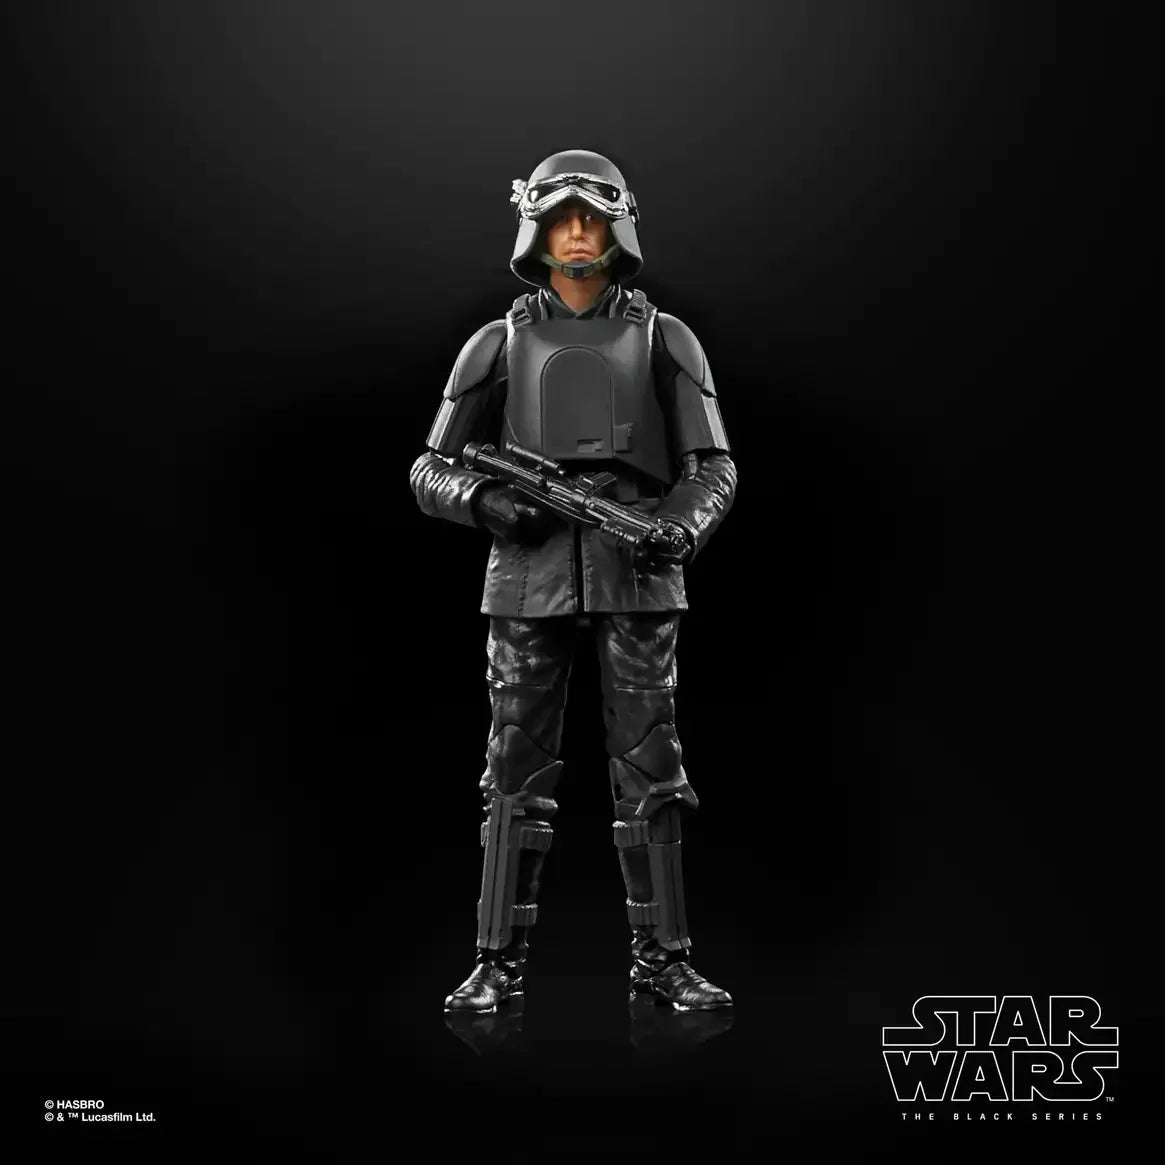 Hasbro Star Wars Black Series Andor #04 Imperial Officer (Ferrix) 6 Inch Action Figure